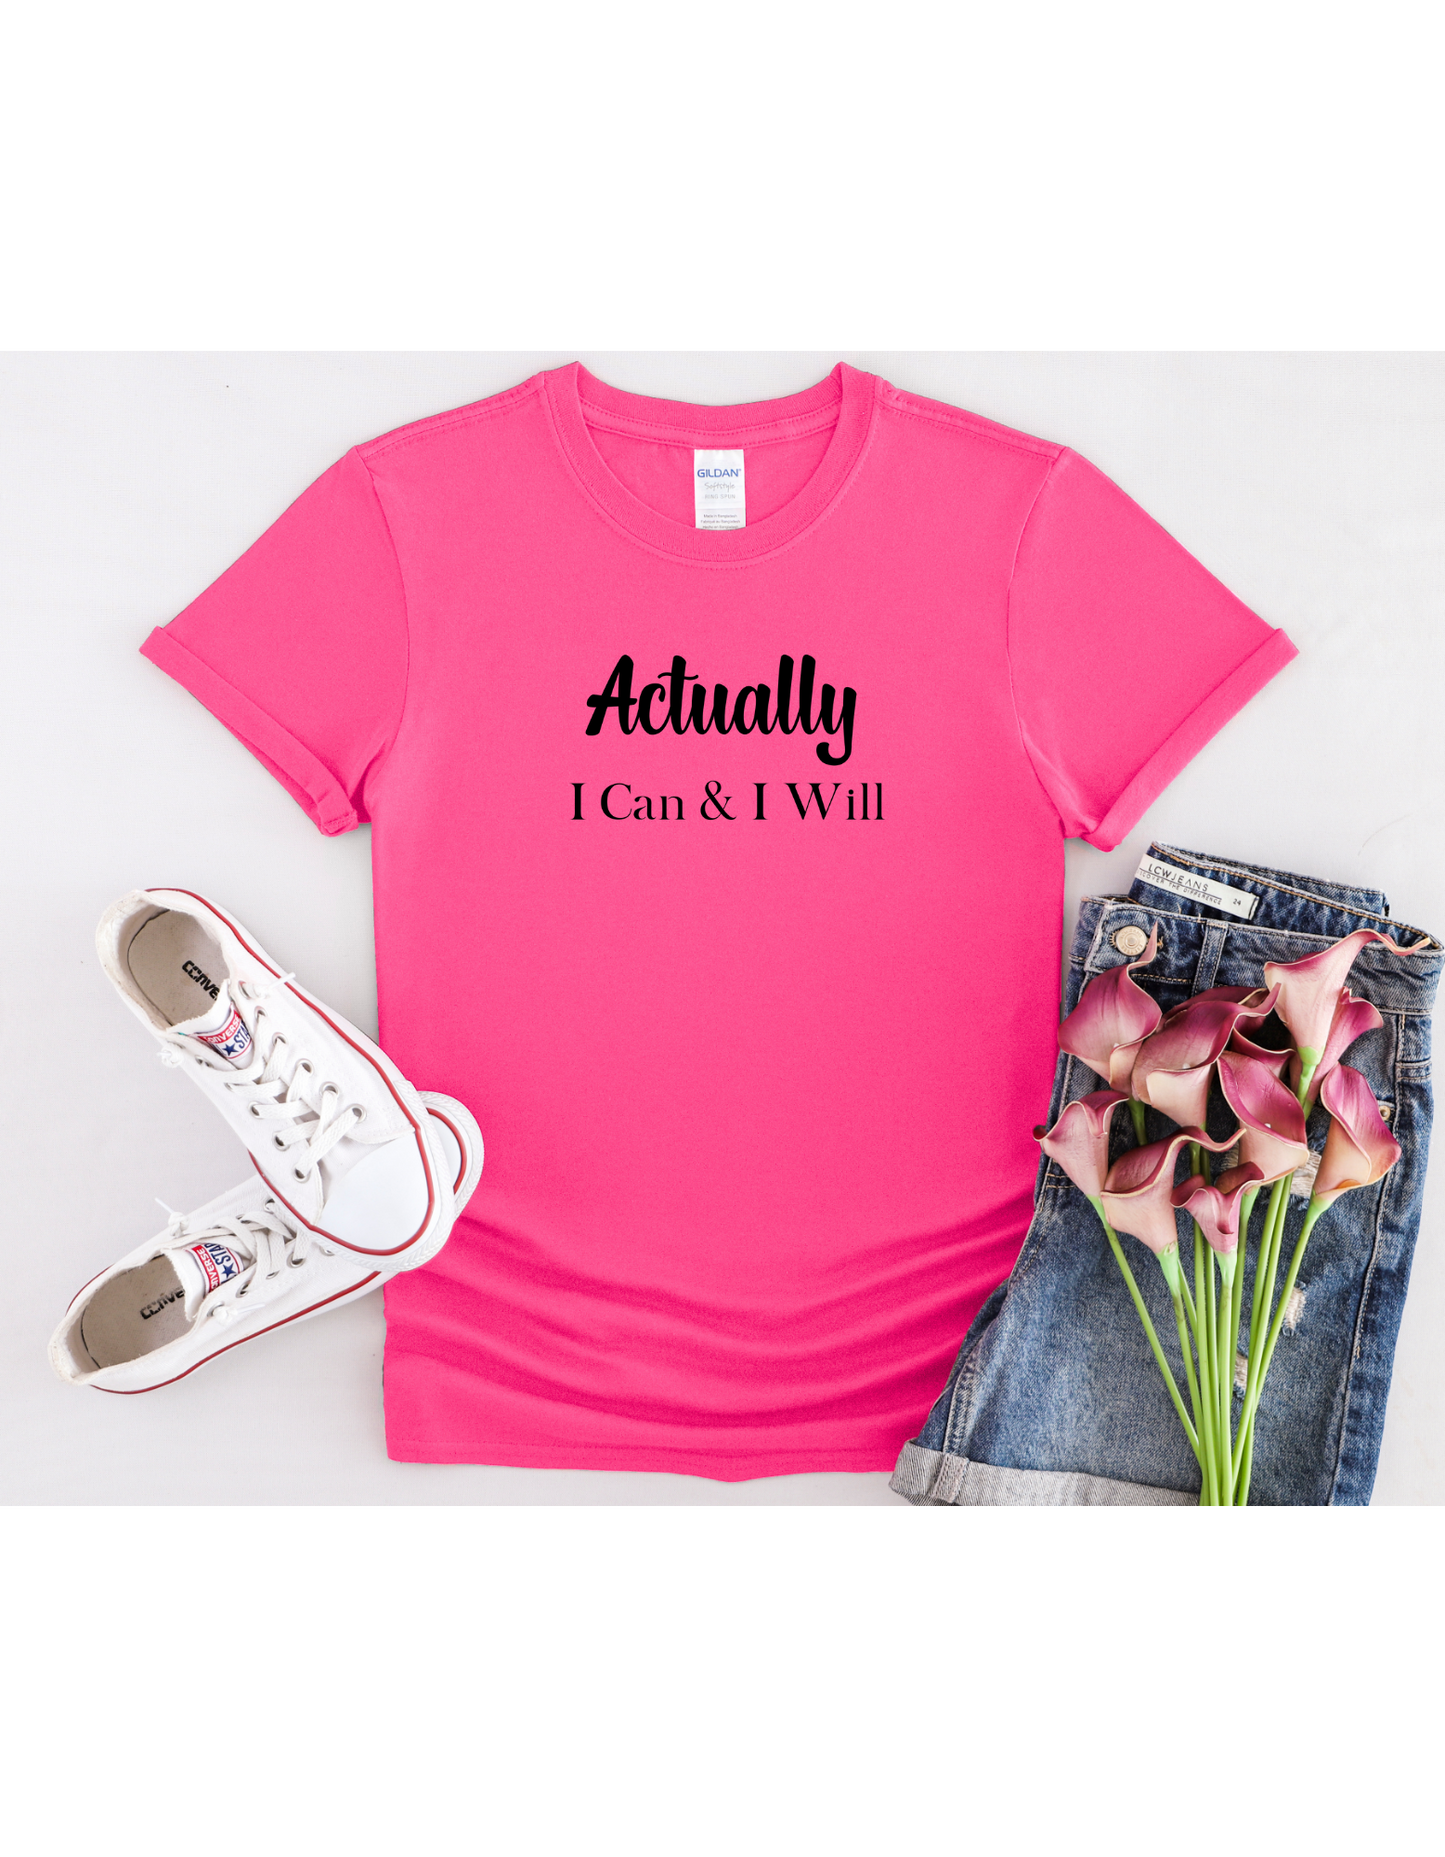 Actually, I Can & I Will Motivational Tee